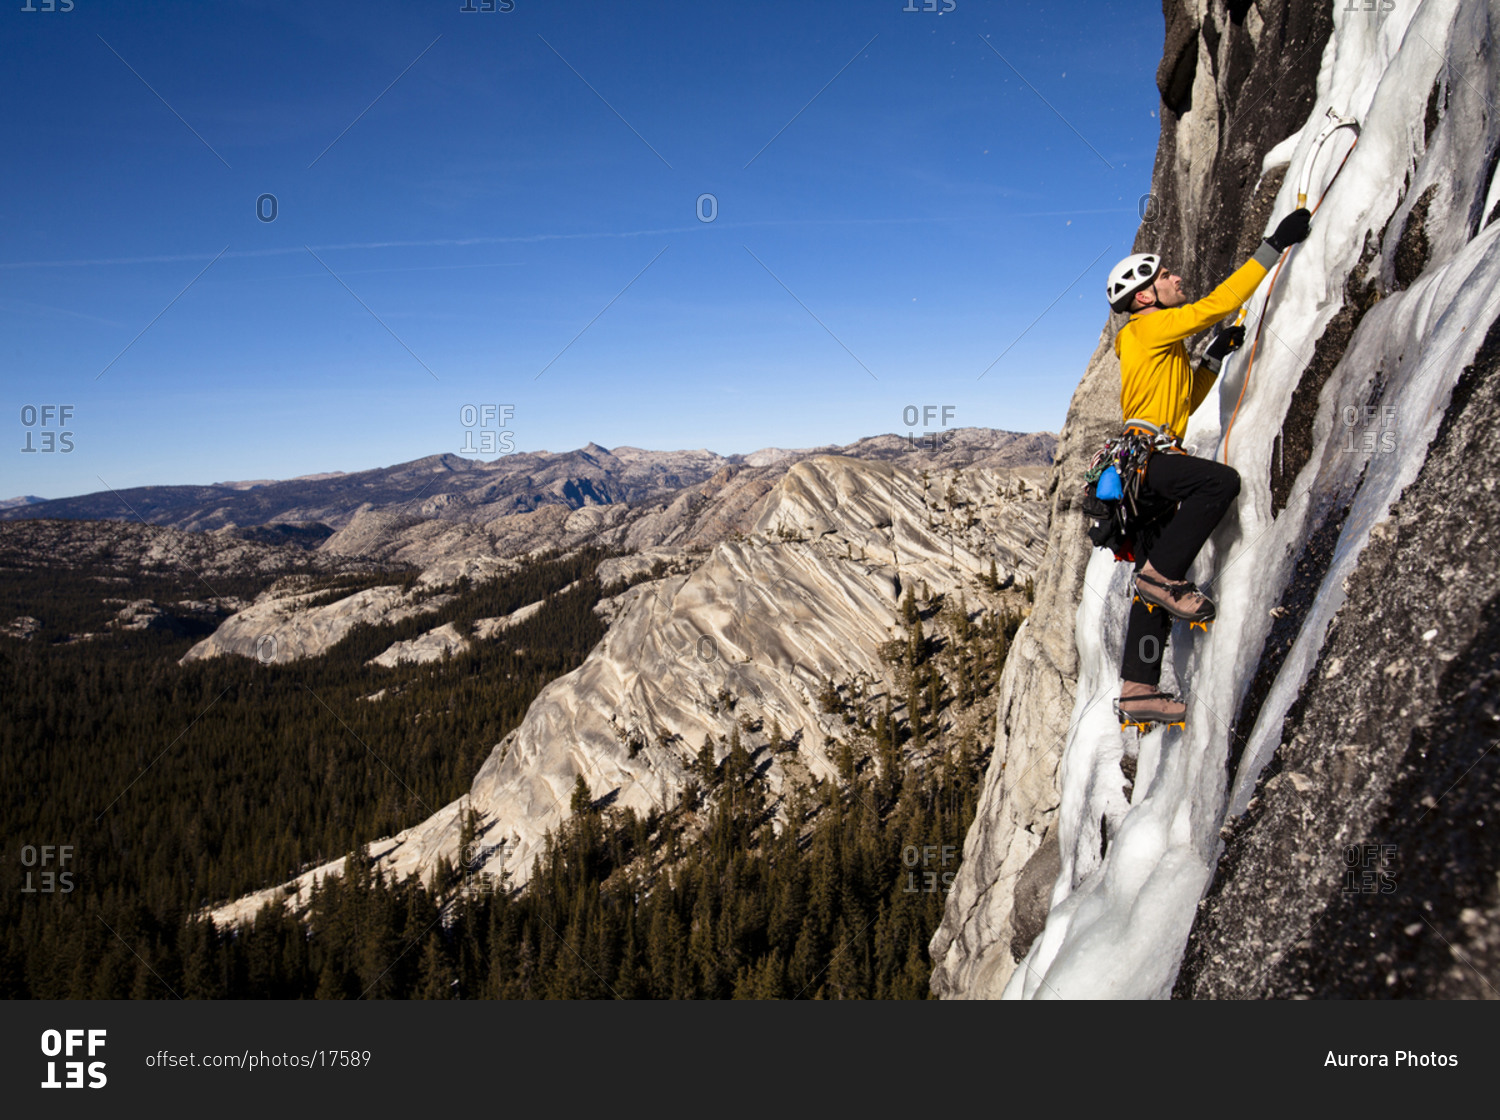 An ice climber climbs Yellow Brick Road (WI3+) on Drug Dome in Tuolumne Meadows located inside Yosemite National Park, California.